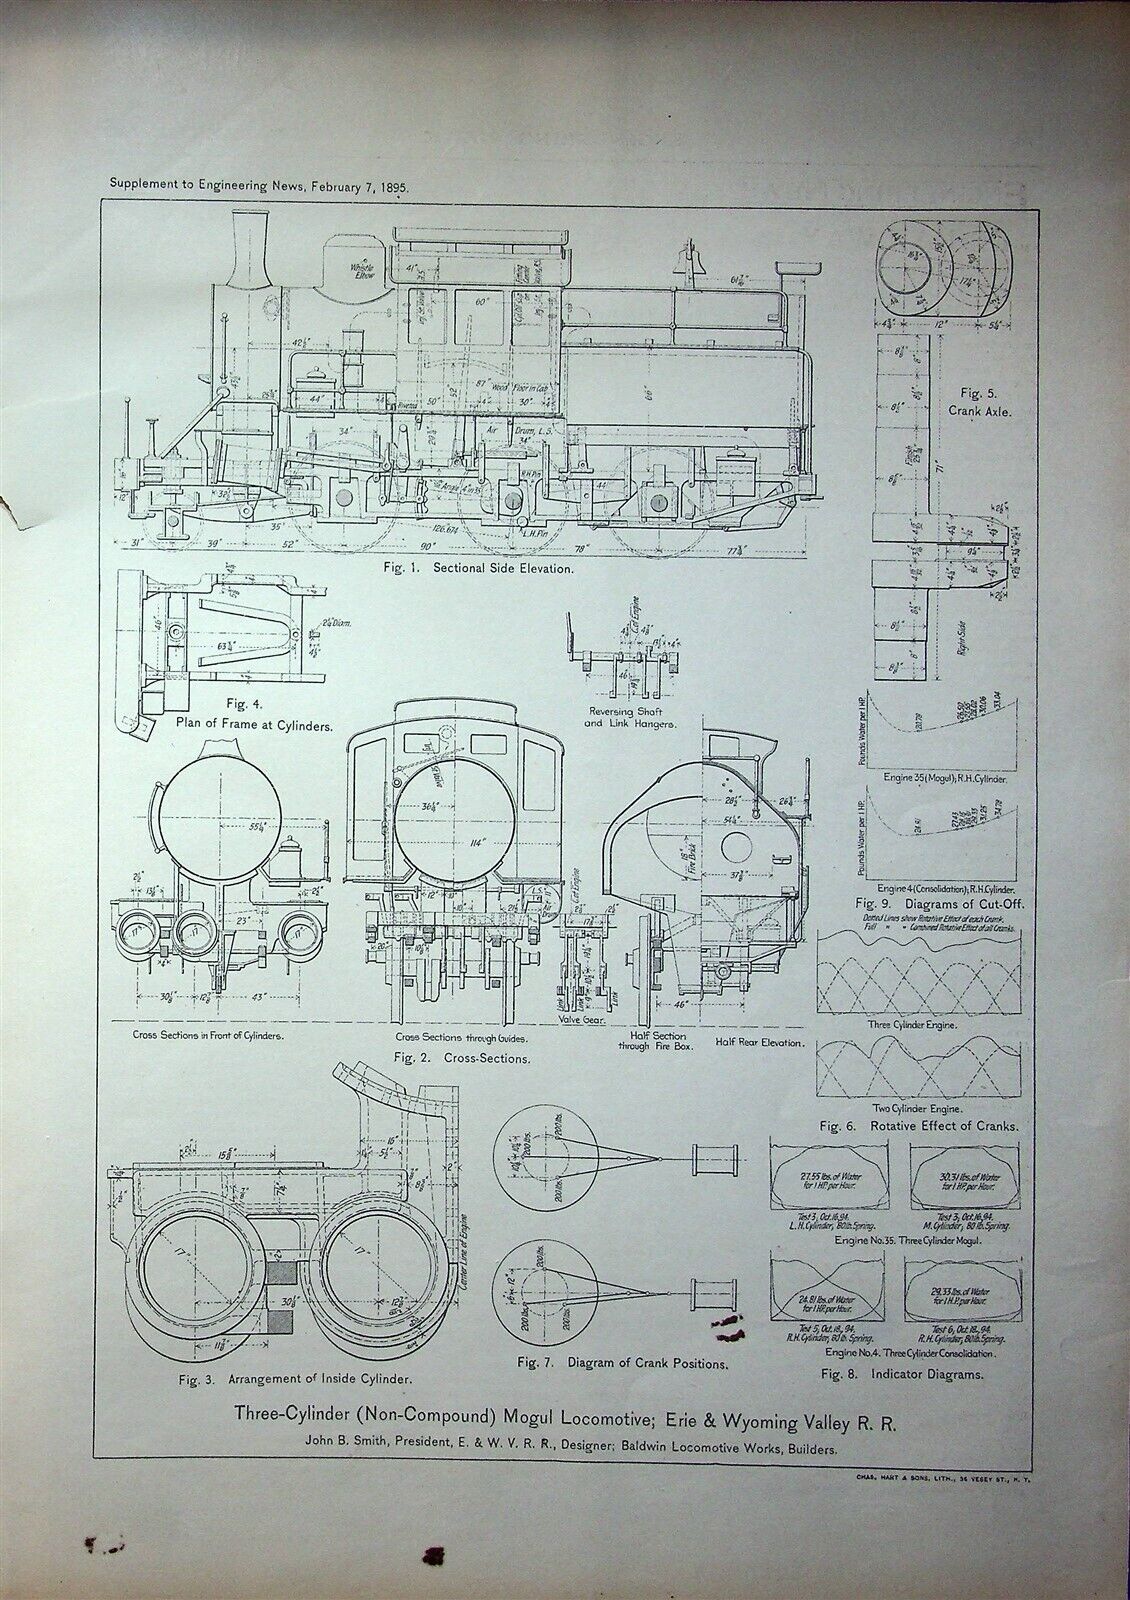 Engineering News February 7 1895 Article & Schematic Mogul Locomotive Erie RR